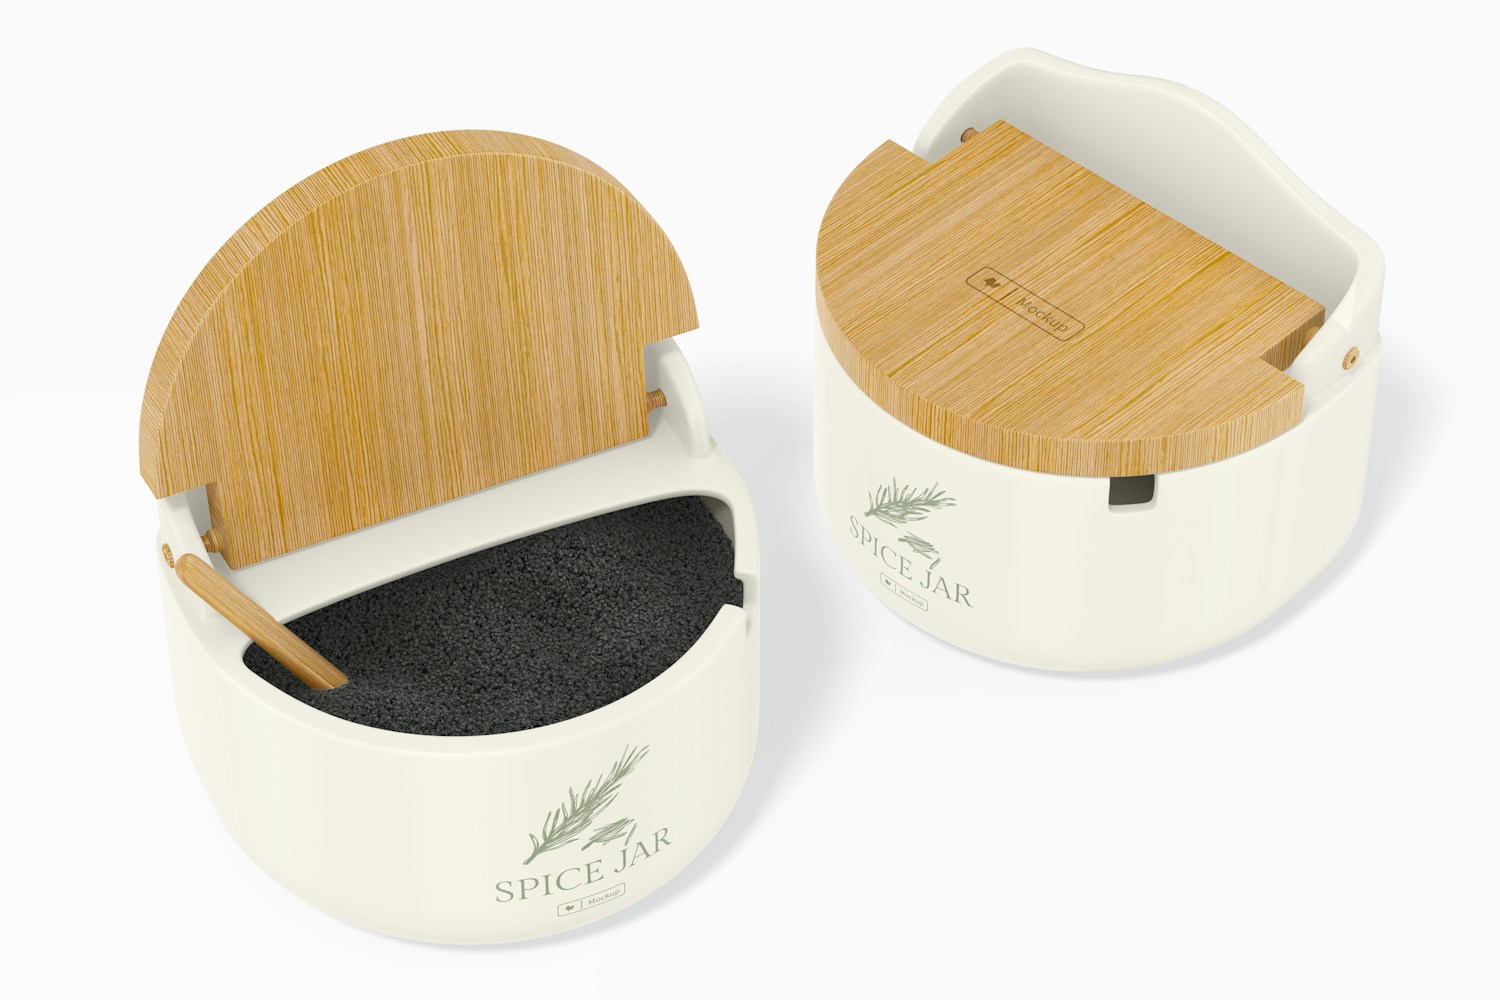 Flip Top Spice Jar Mockup, Opened and Closed